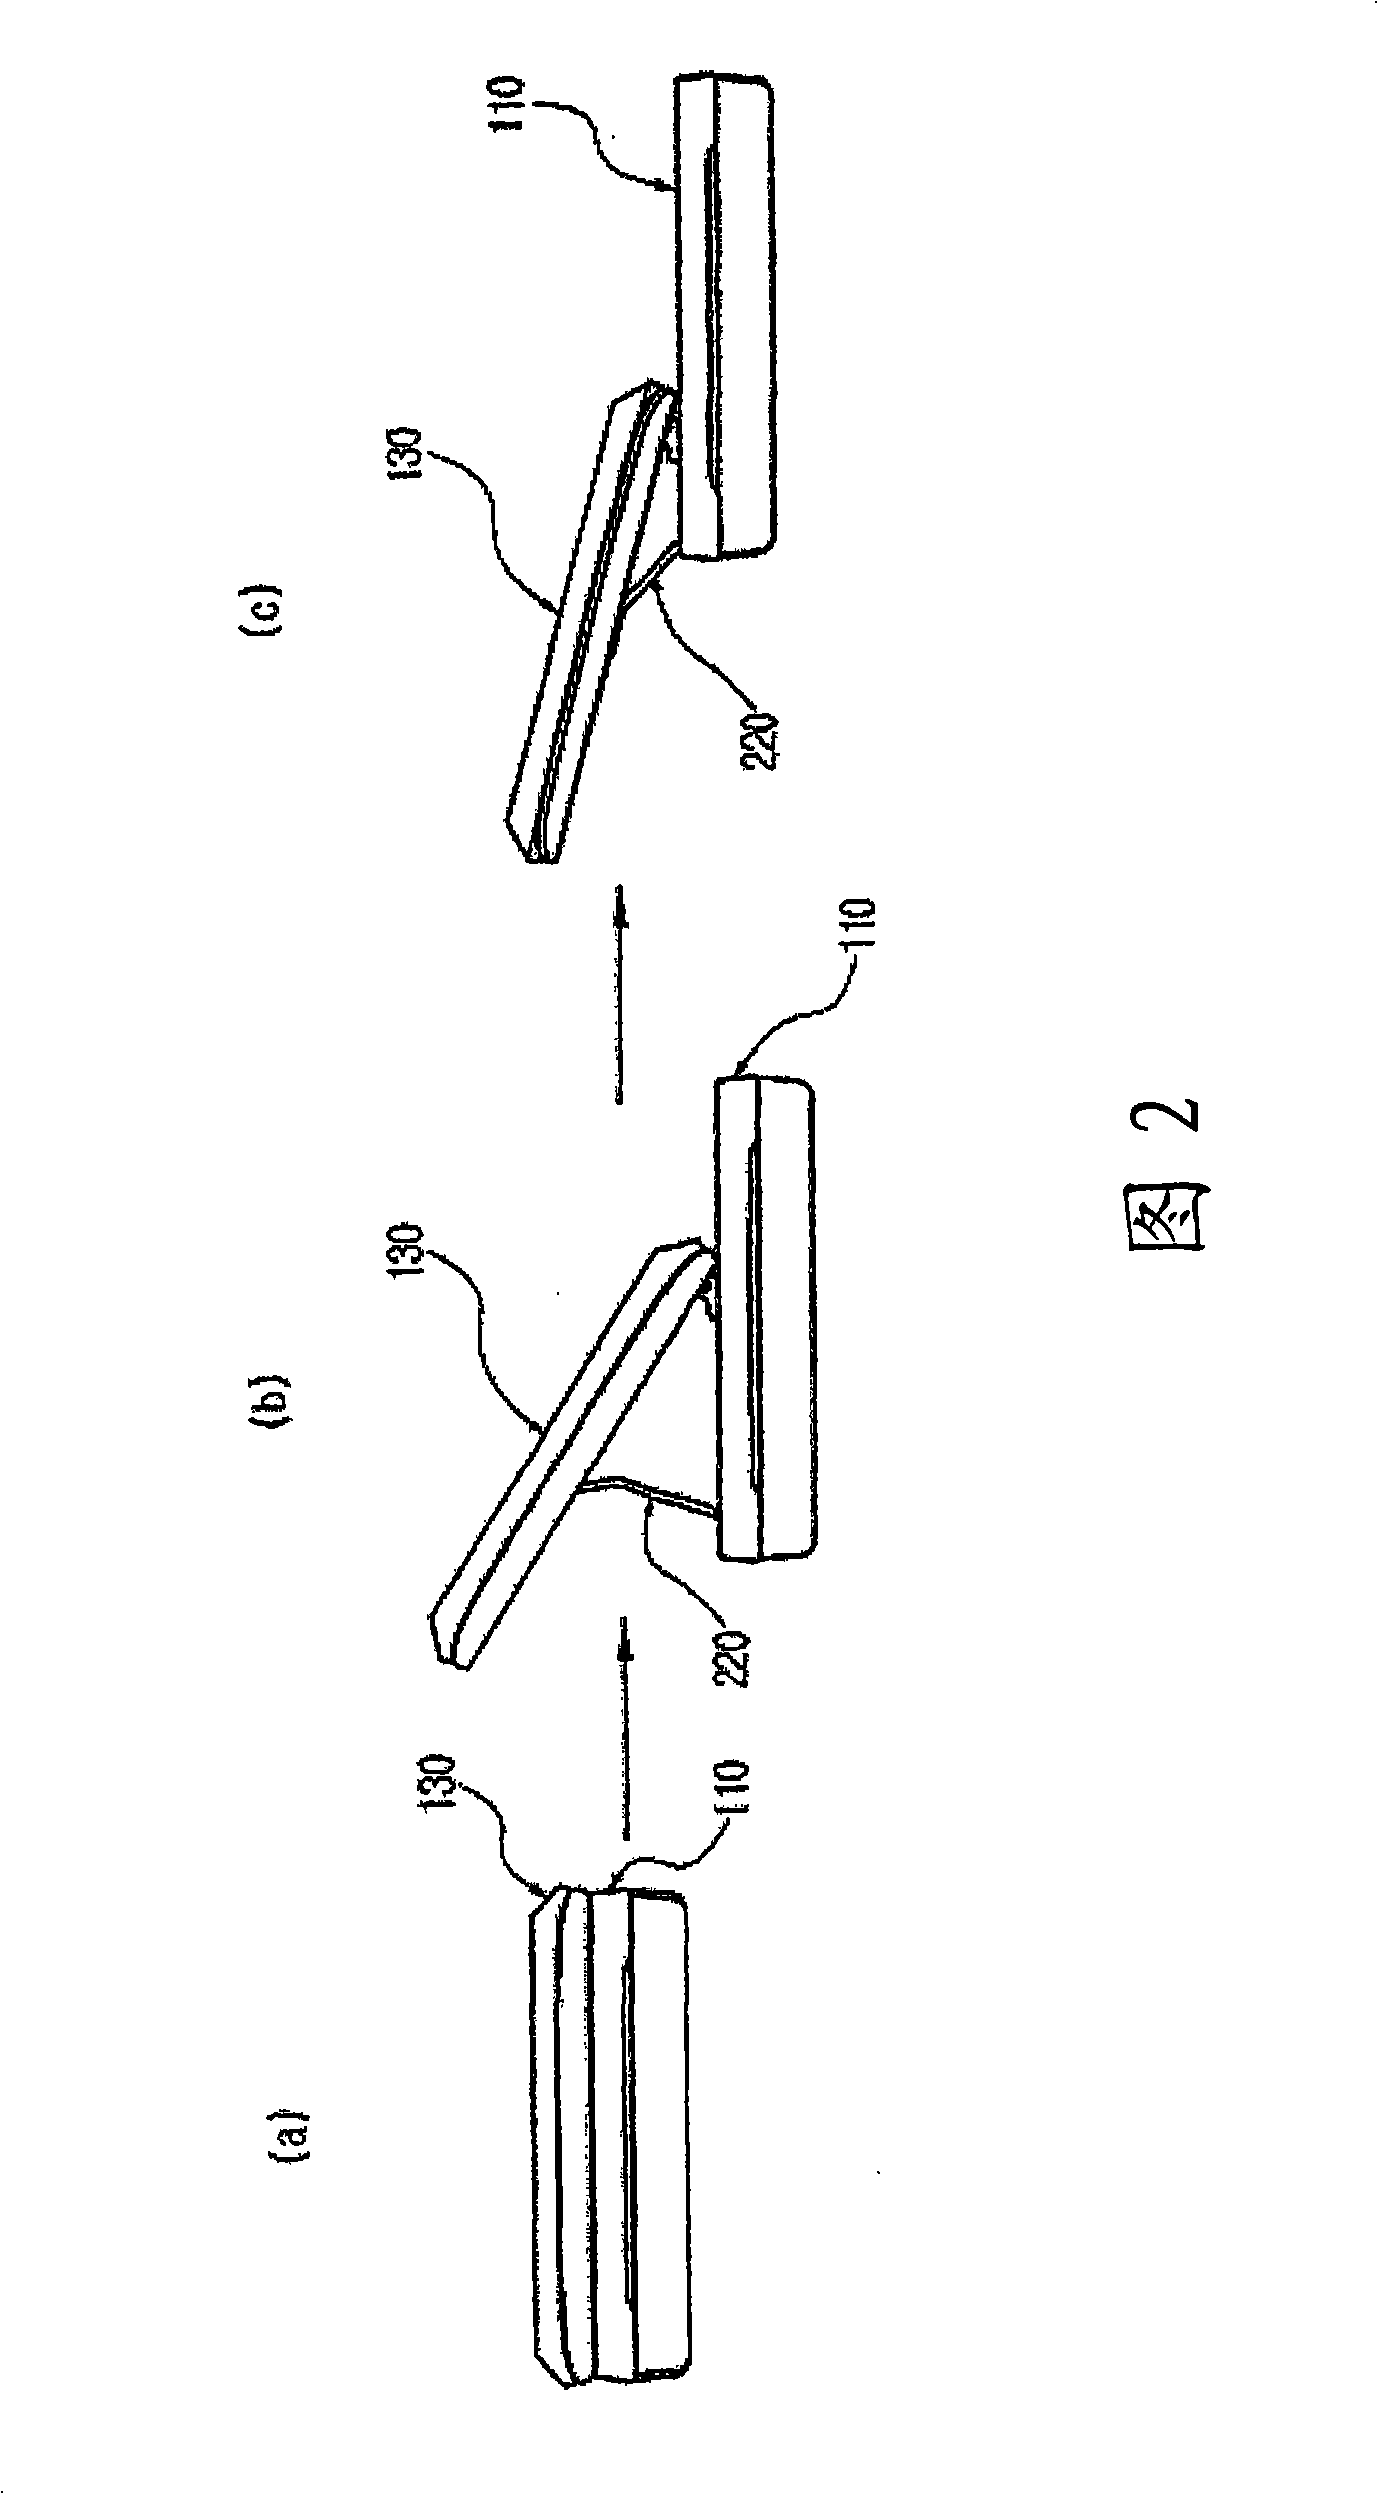 Slide-up opening and closing mechanism for portable terminal